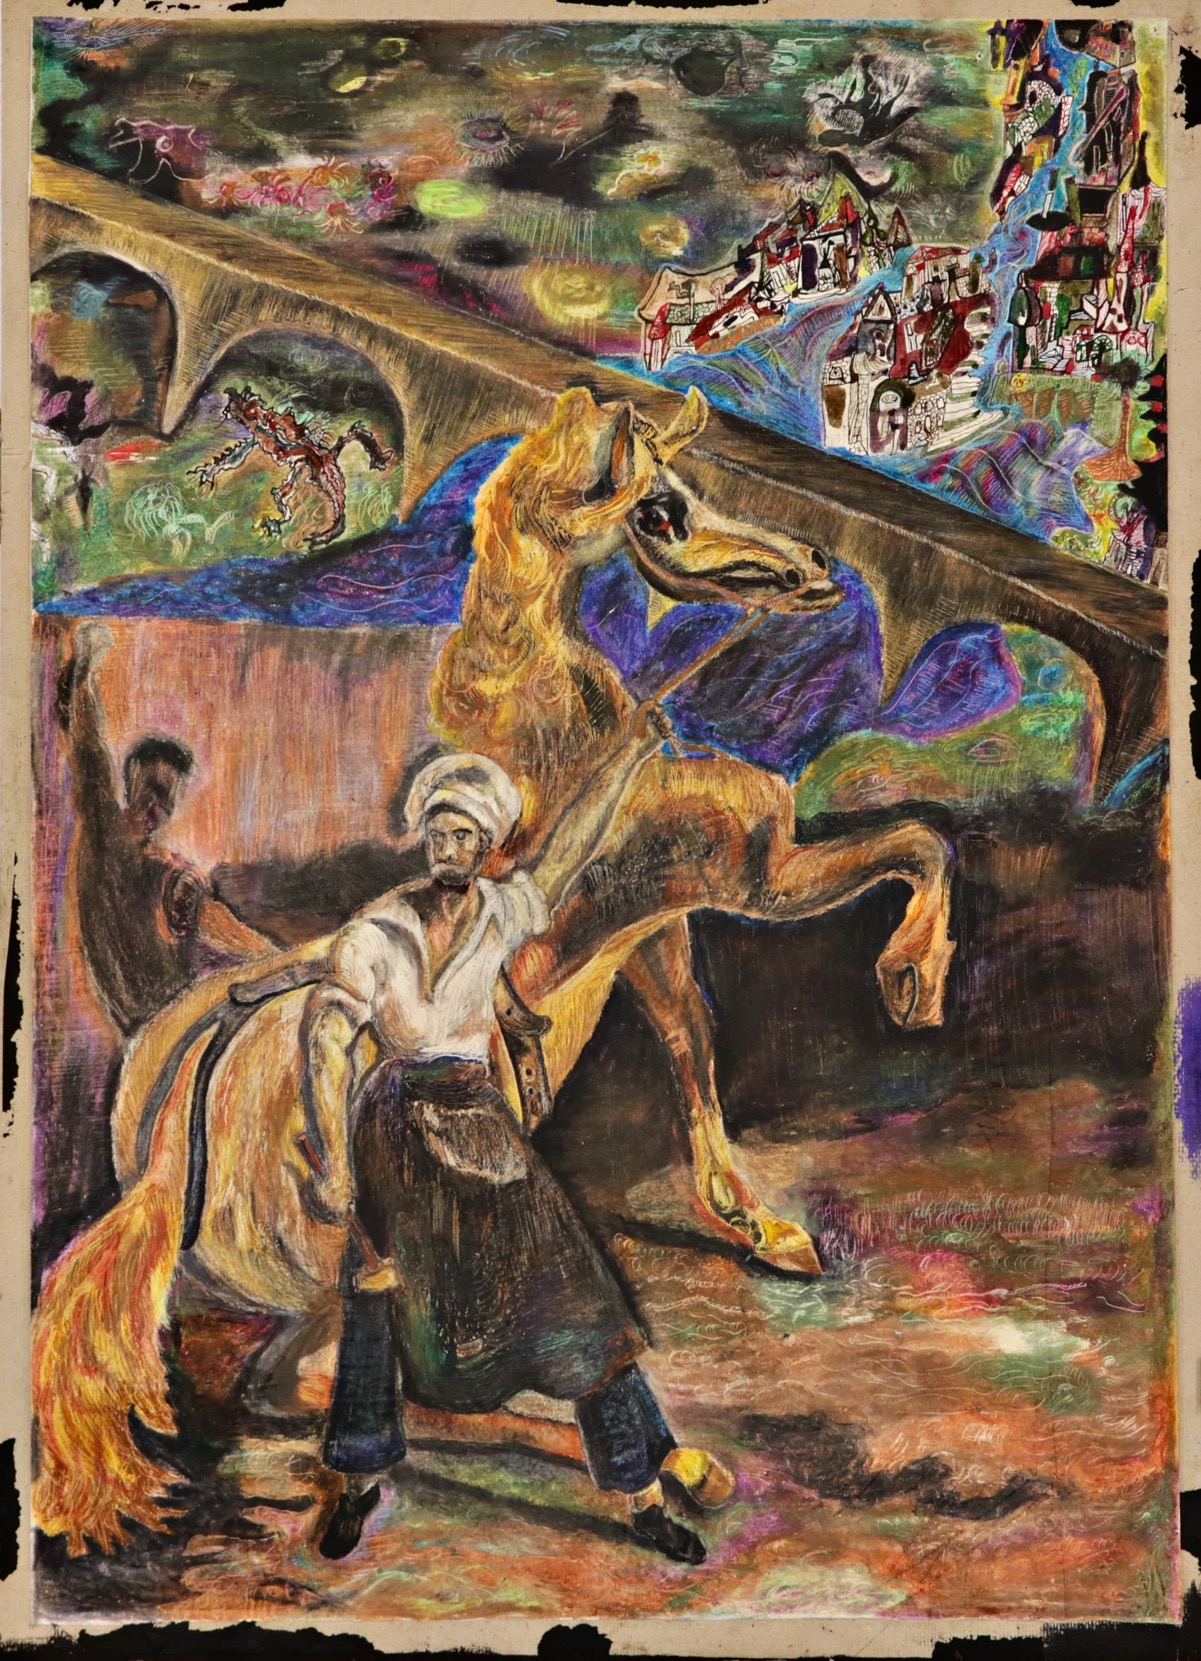 "Indian blacksmith and horse", gouache and watercolor, 20th century painting. - Image 2 of 4